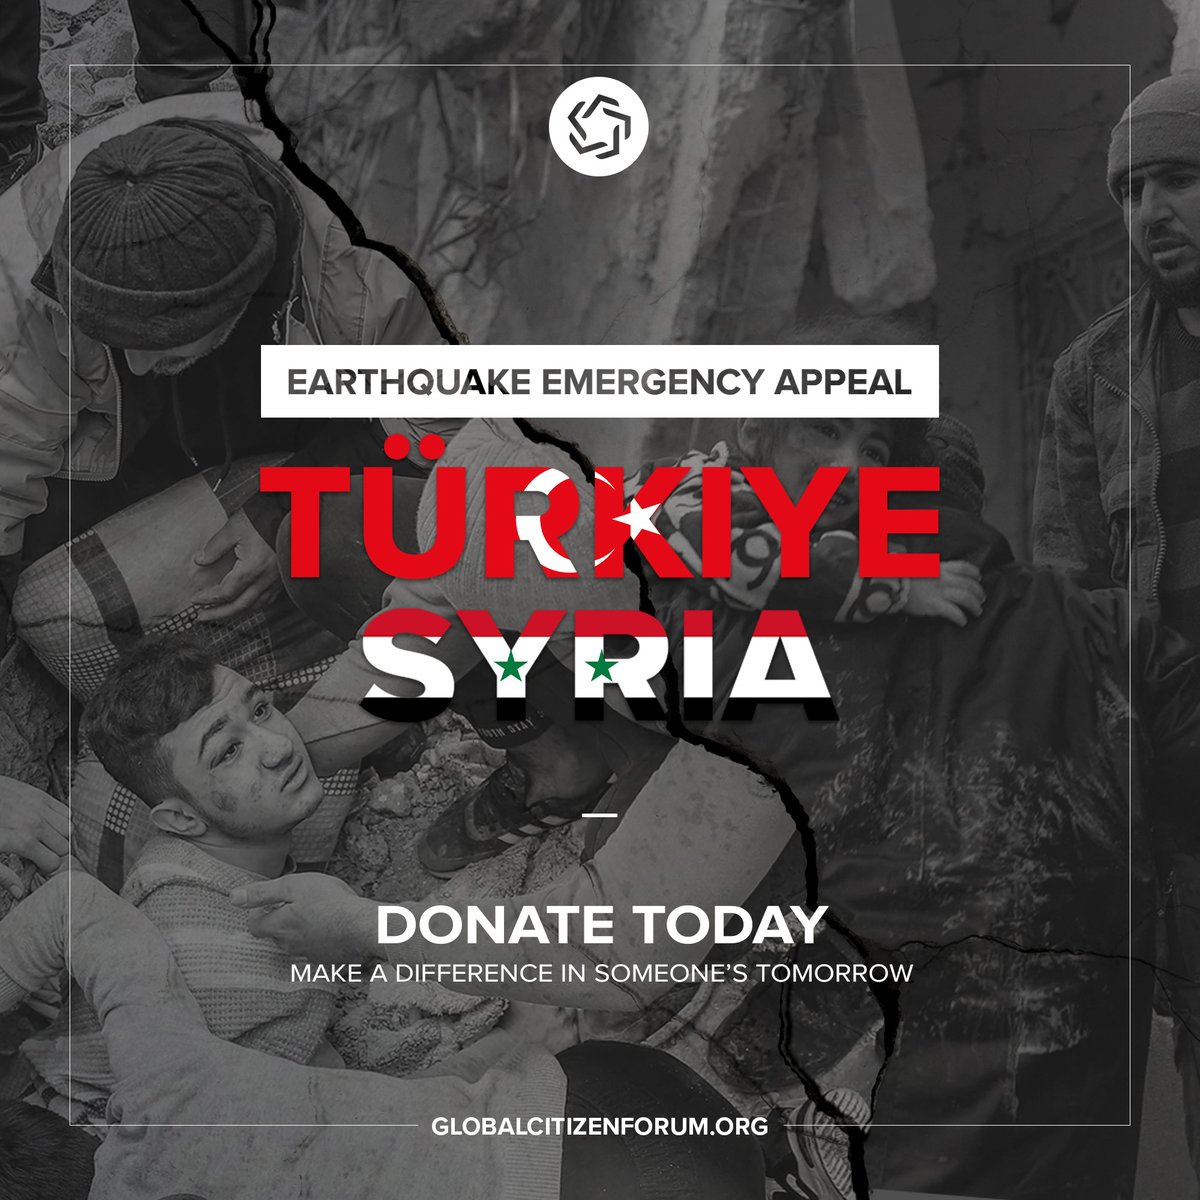 We are raising funds to deliver humanitarian assistance. We will match all contributions made by our community to help alleviate the damage caused by this heartbreaking and unprecedented natural disaster. Your donation makes a difference. Donate now: globalcitizenforum.org/donation/